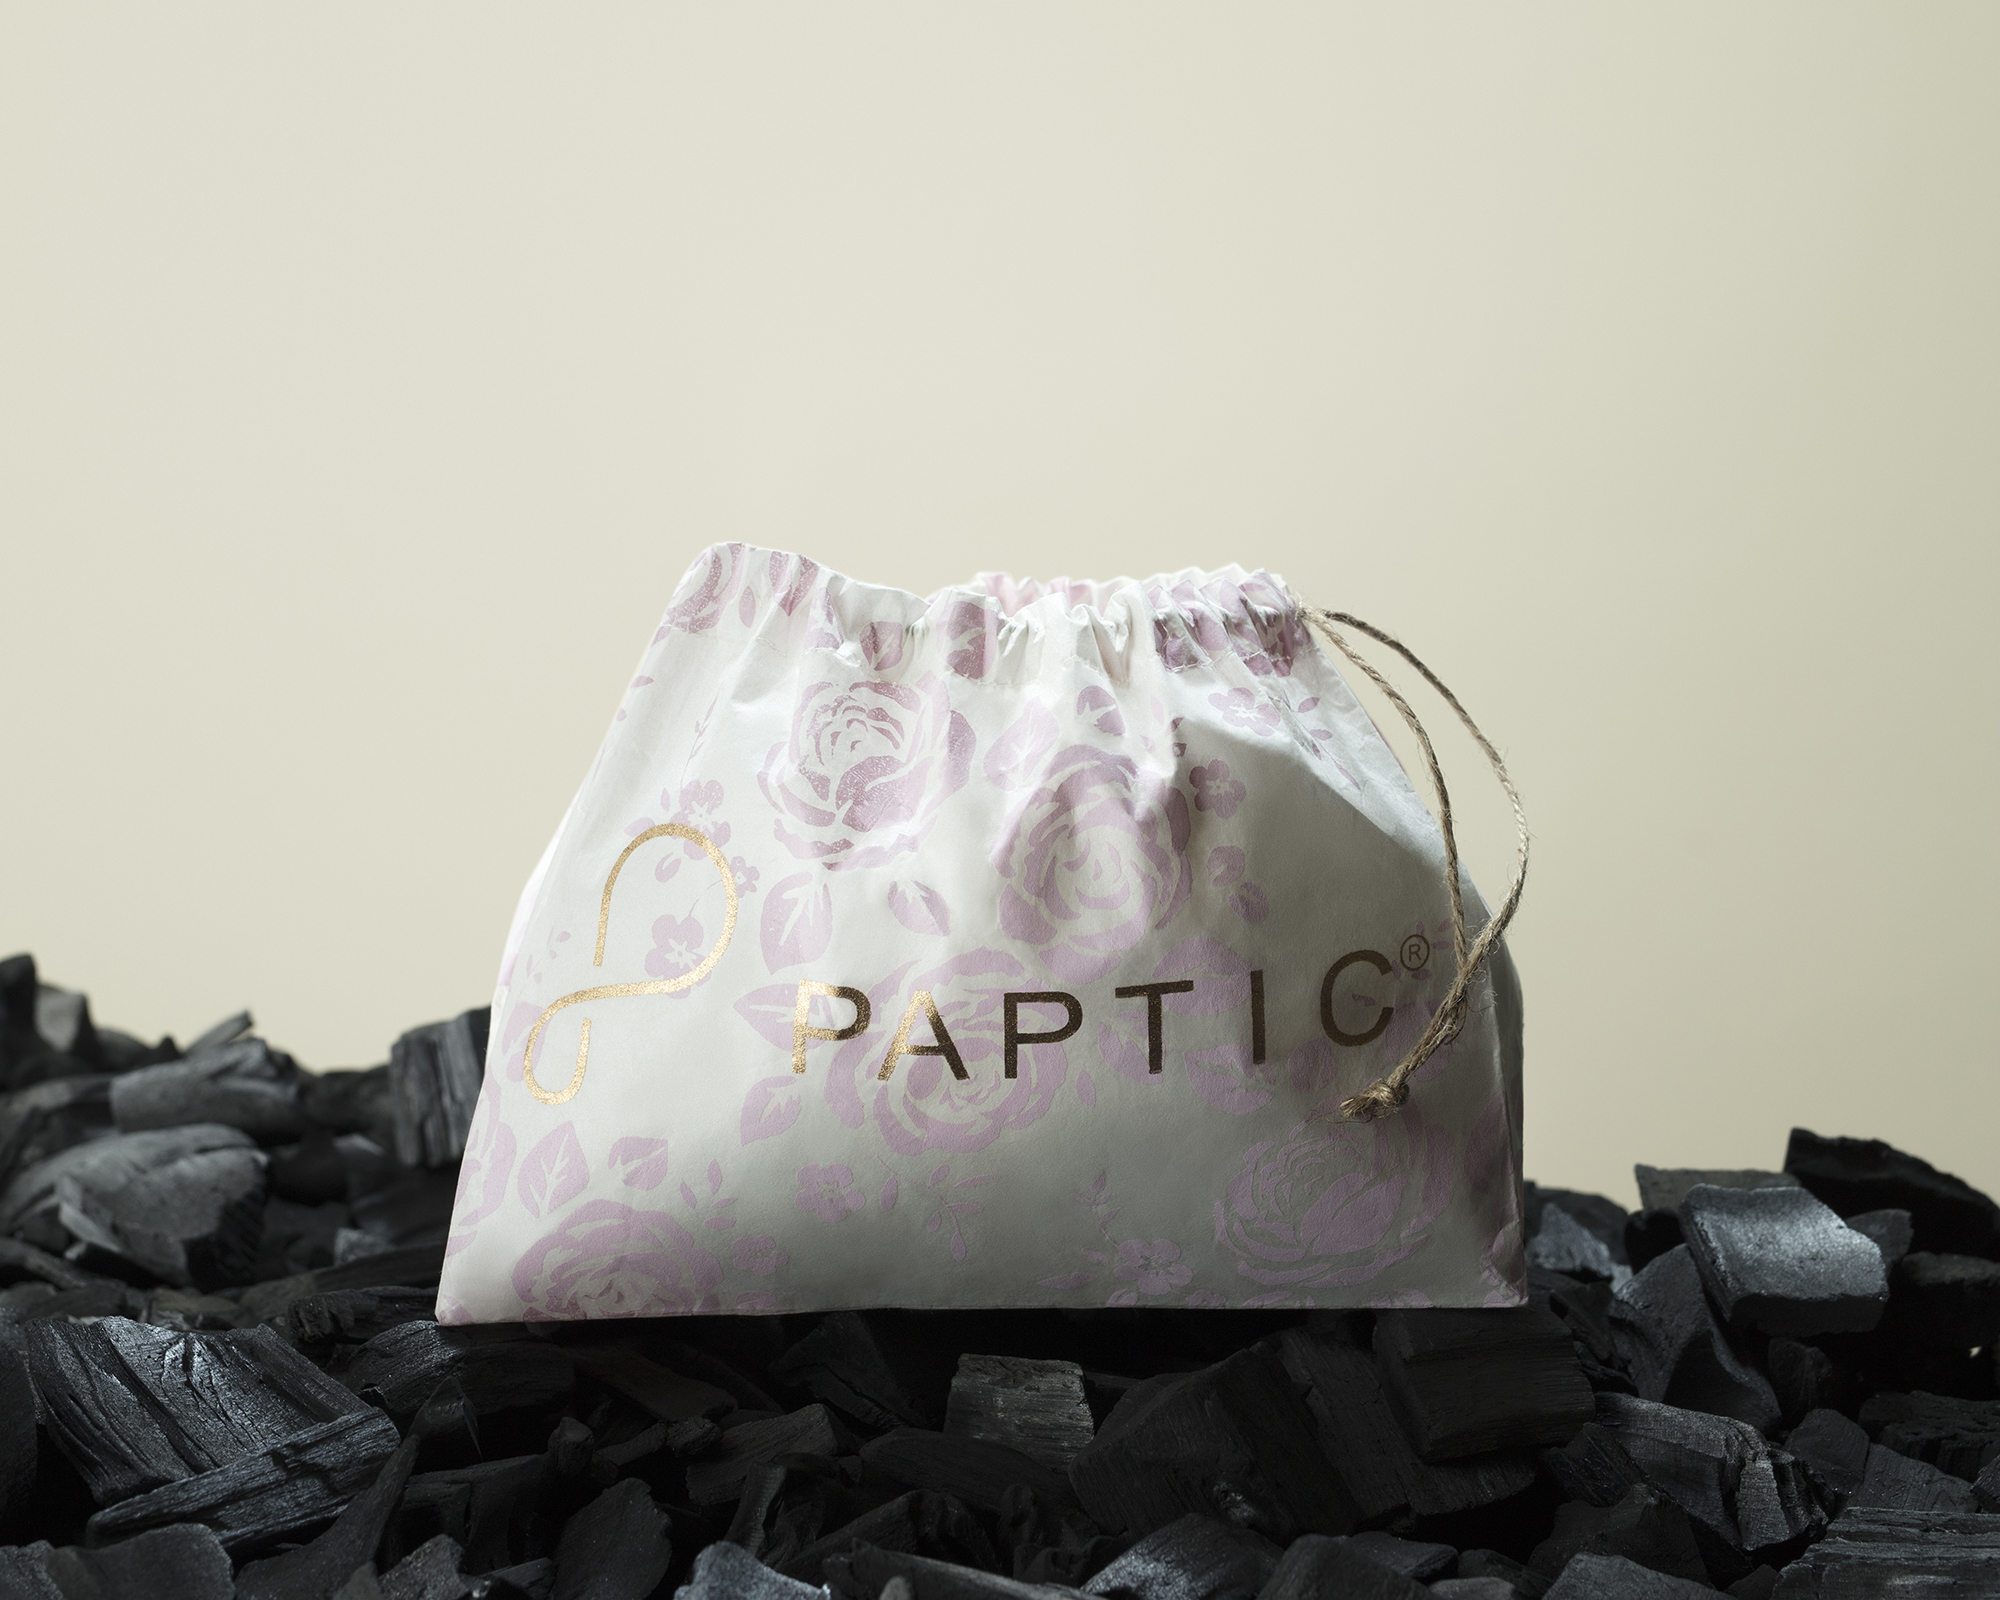 Paptic is a sustainable alternative for plastic bags